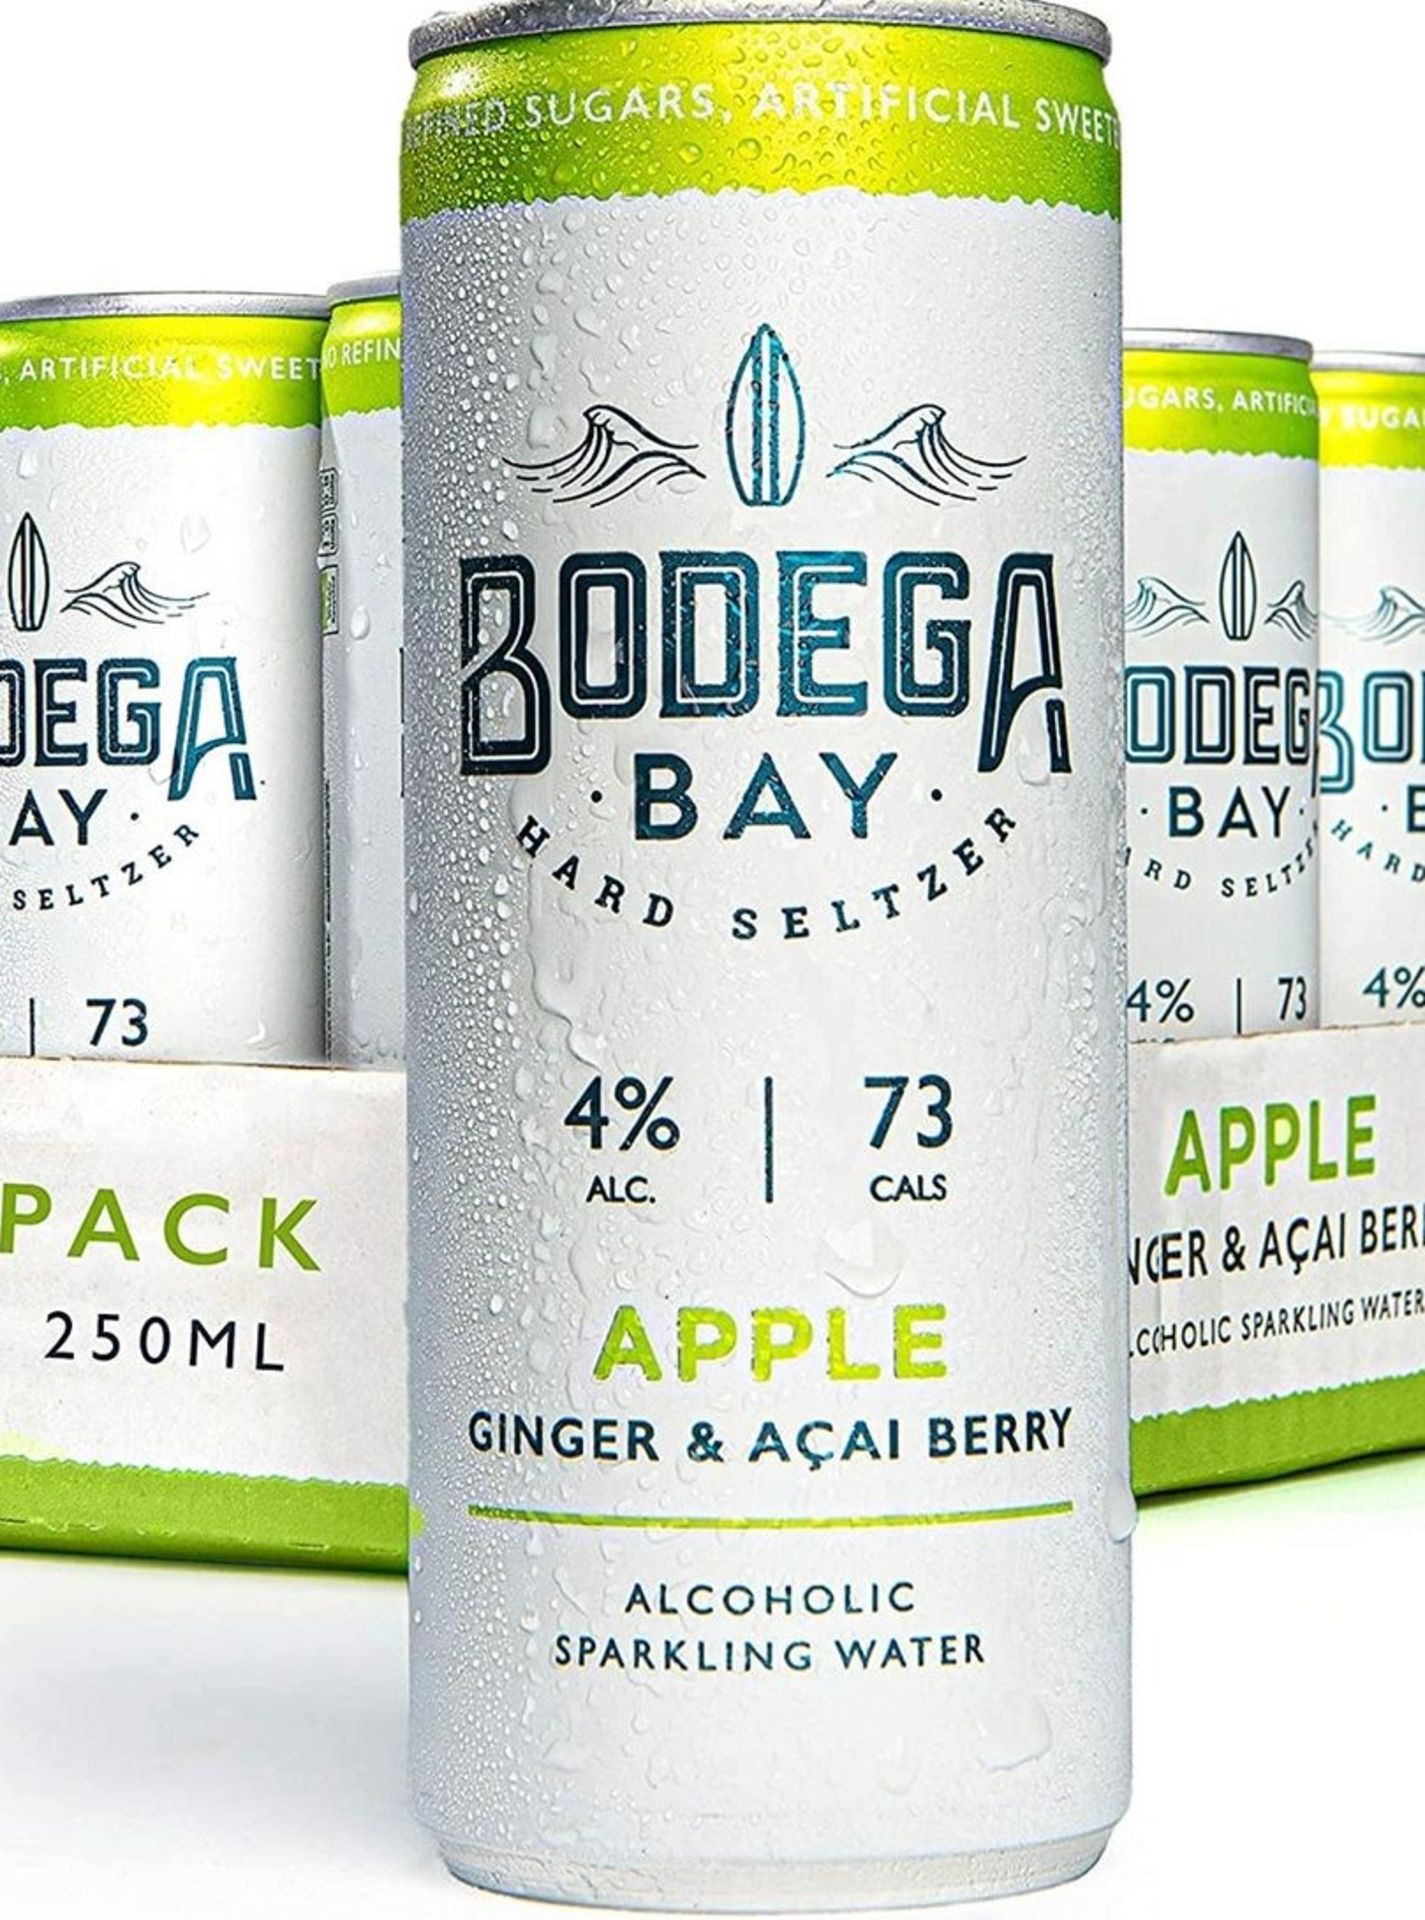 360 x Cans of Bodega Bay Hard Seltzer 250ml Alcoholic Sparkling Water Drinks - Various Flavours - Image 15 of 20